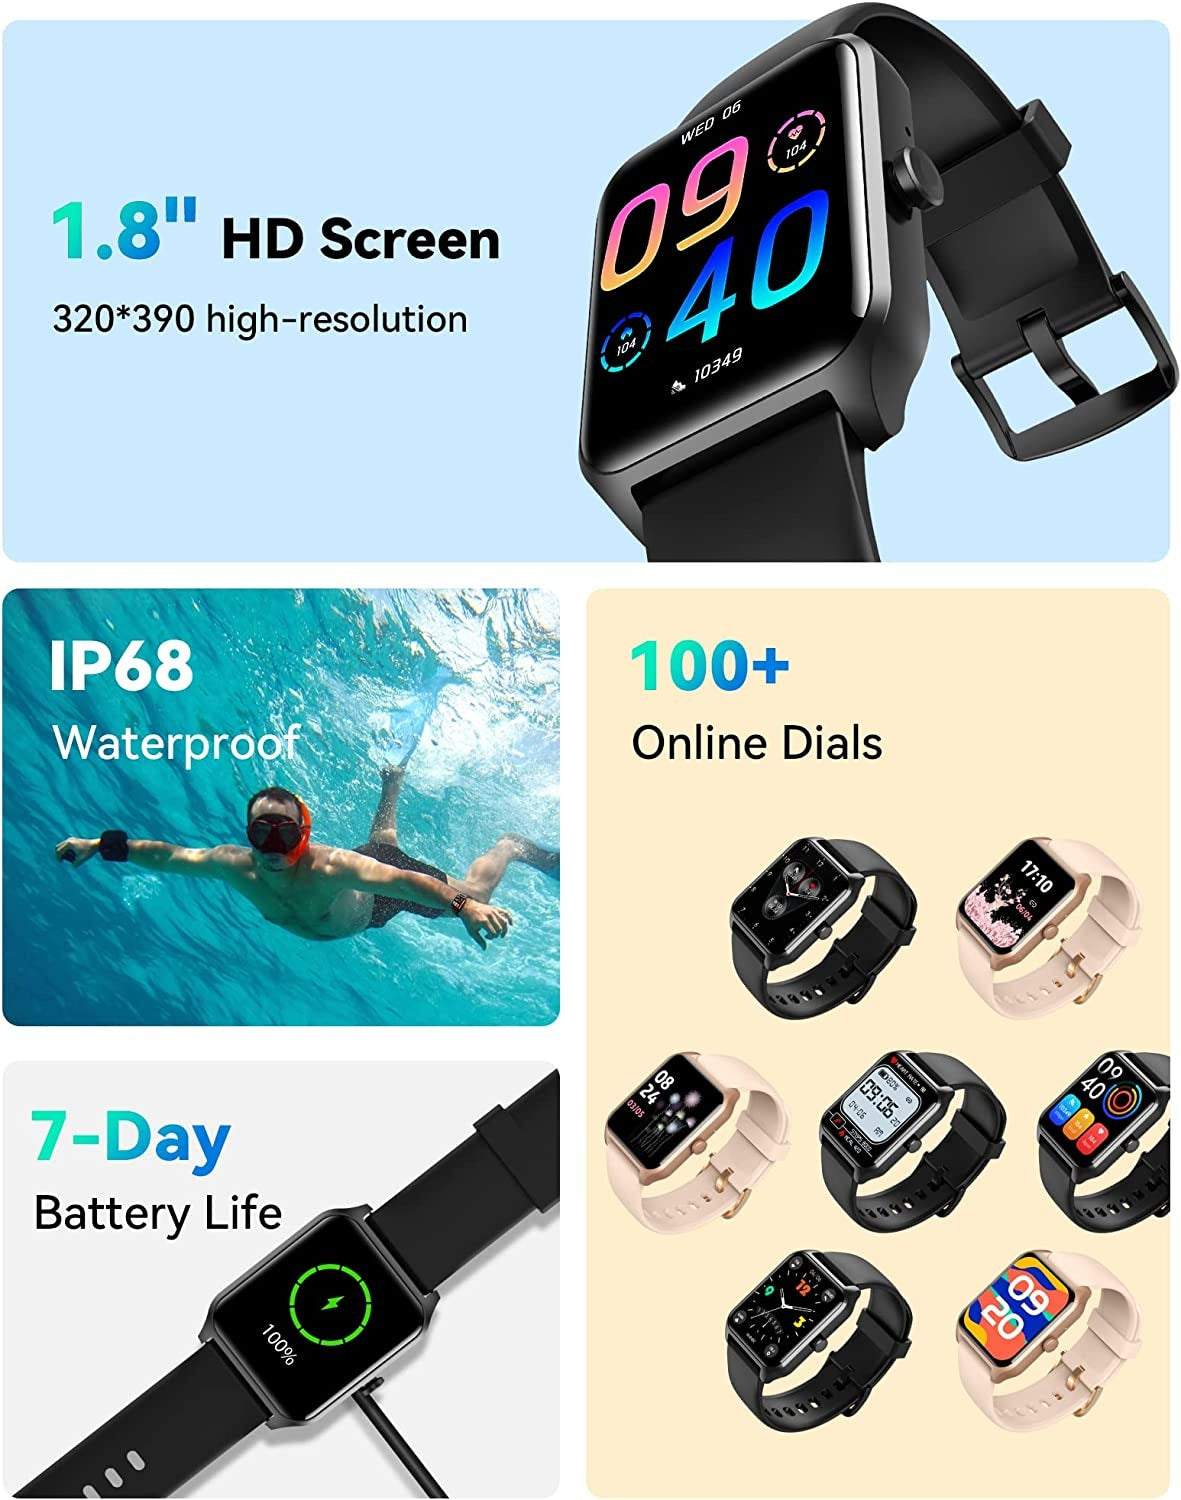 Fitpolo LW83 HD Touch Screen Smartwatch with Bluetooth Call - Black